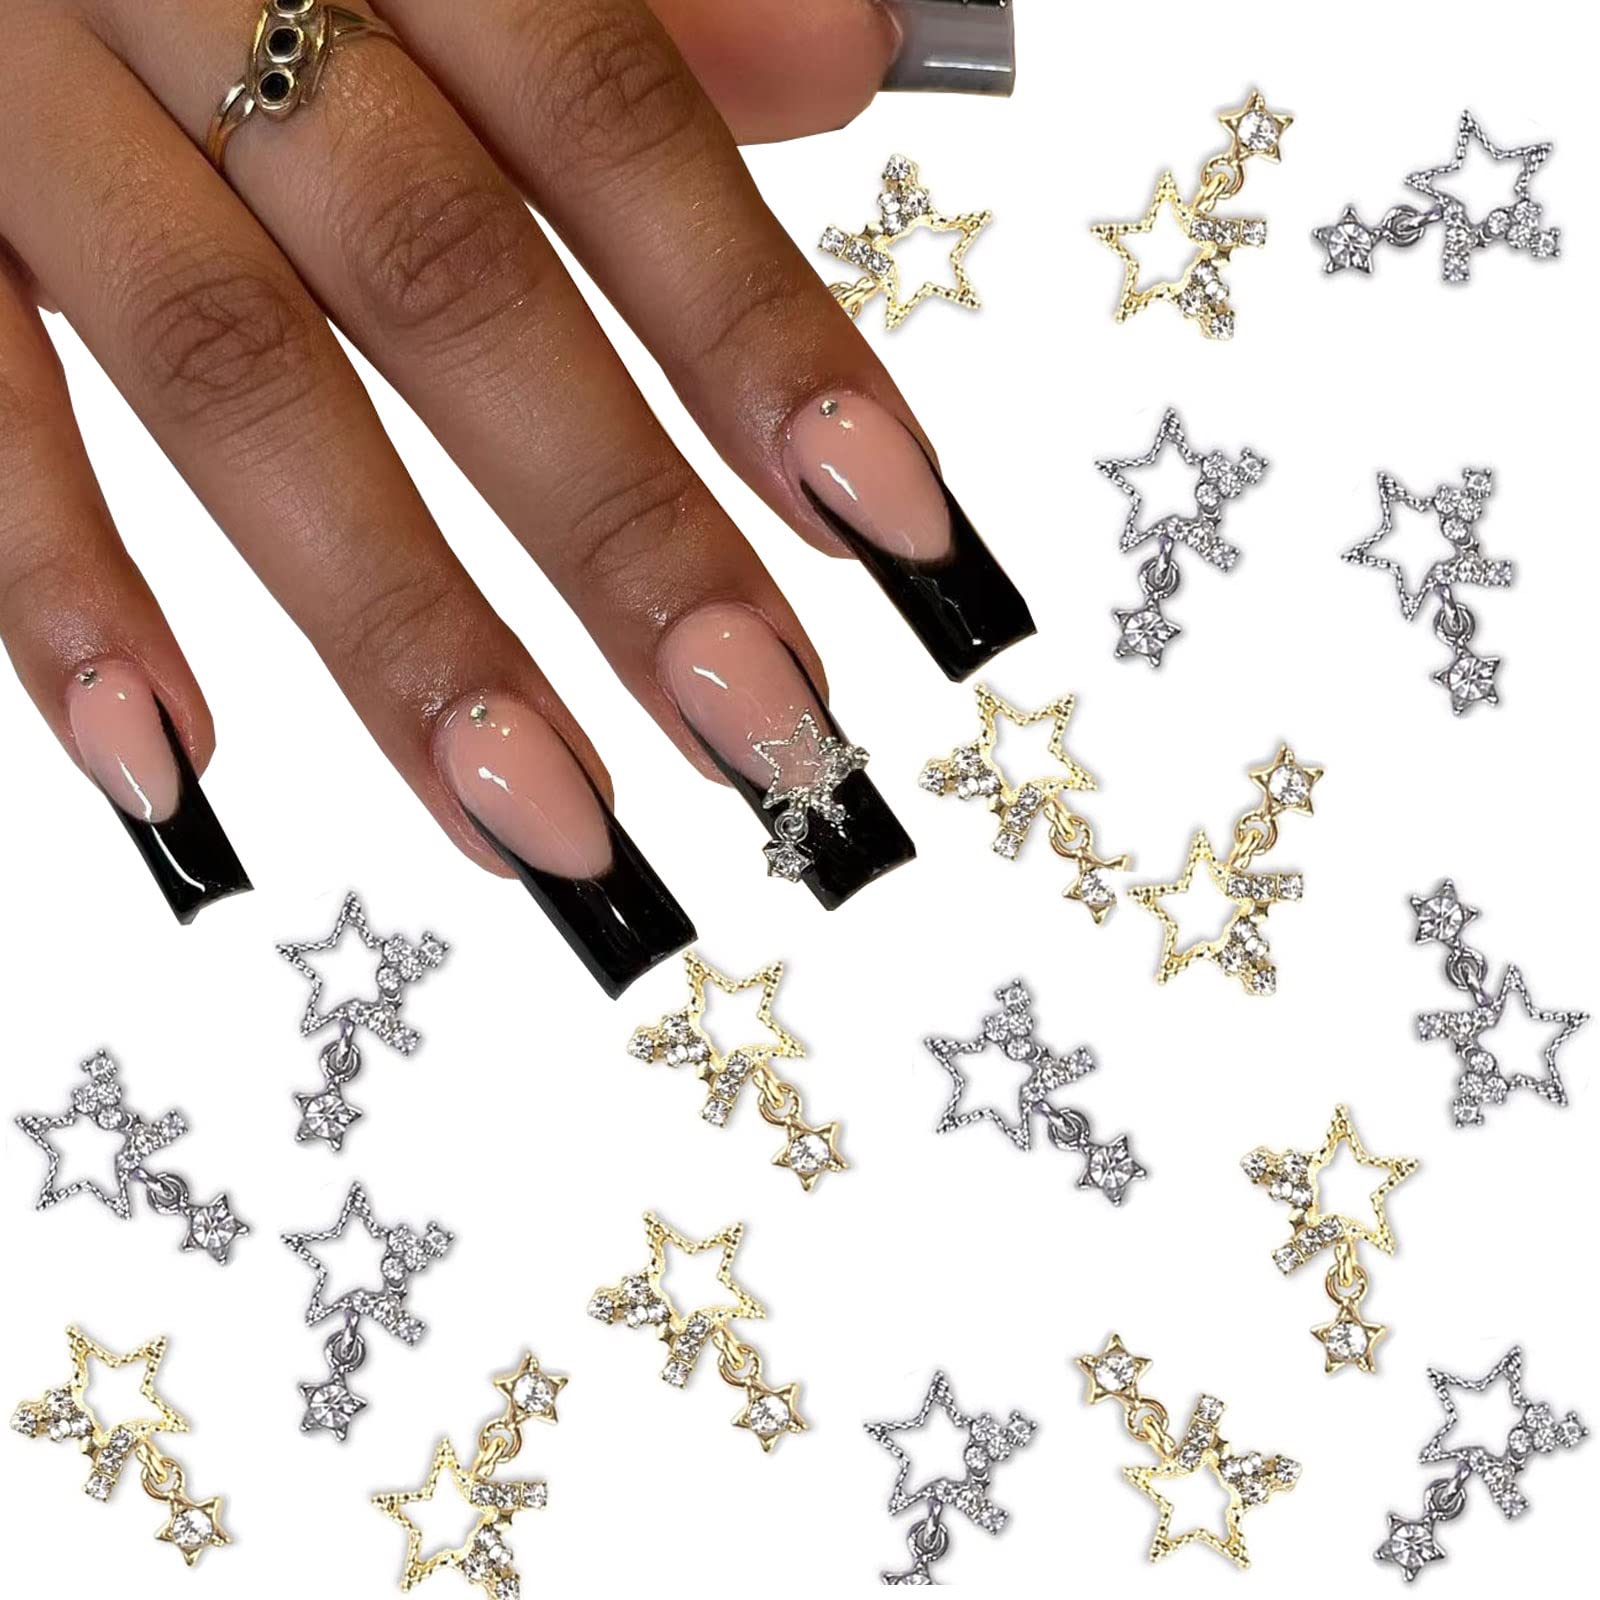  25 PCS Planet Nail Art Charms White Pink 3D Cross Nail Art  Supplies with Rhinestones Saturn Shape Design Nail Gems Shiny Nail Jewelry  Acrylic Accessories for Women Nail Decorations : Beauty